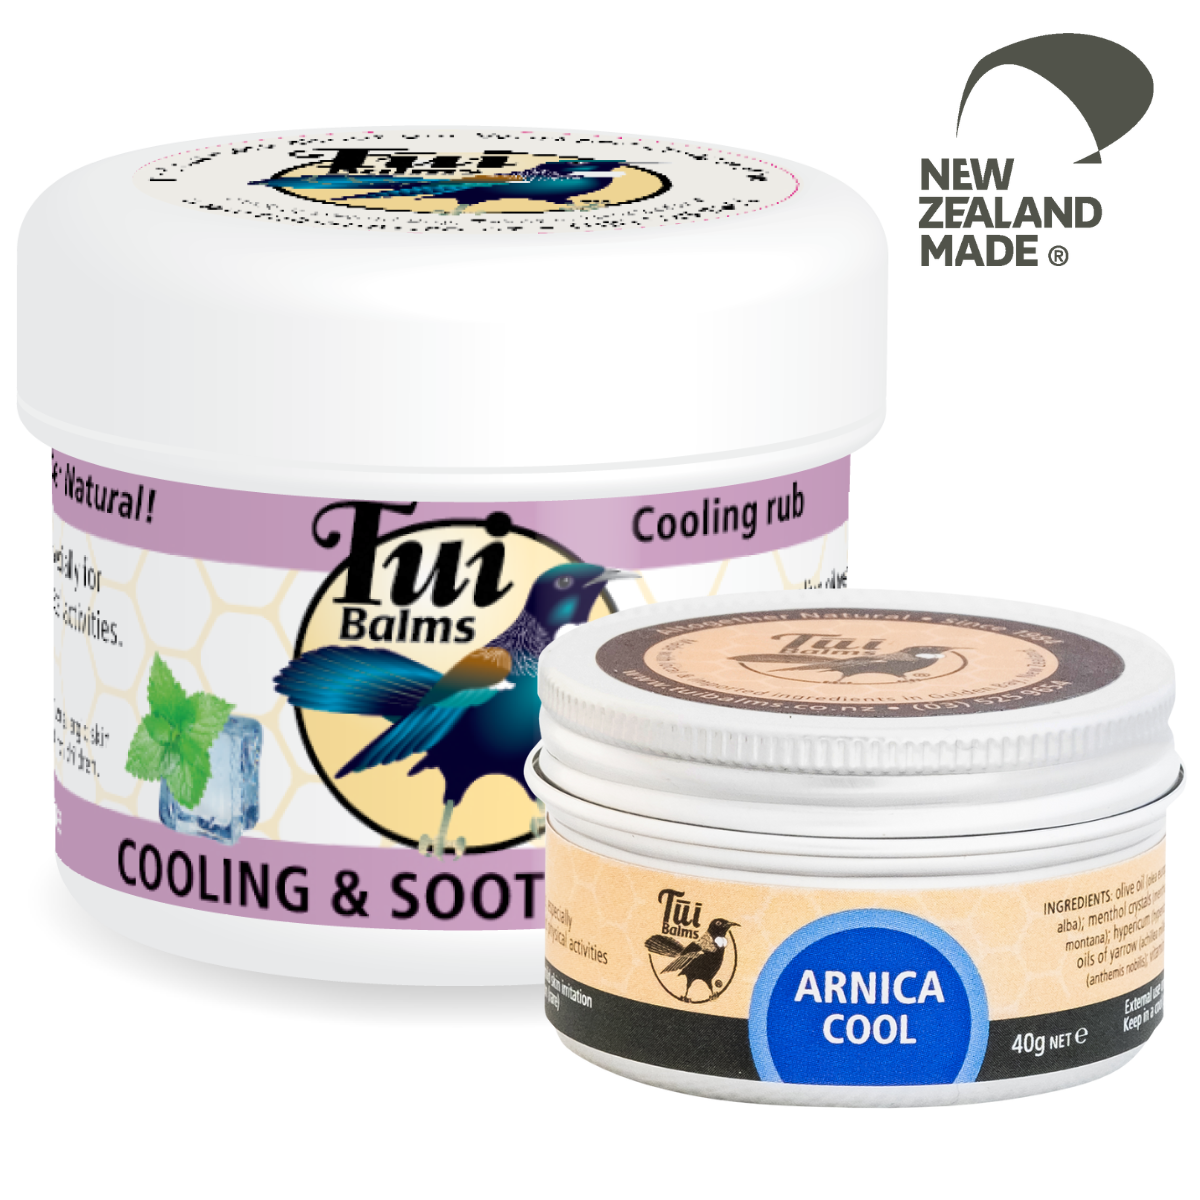 Arnica Cool – Cooling & Soothing Balm